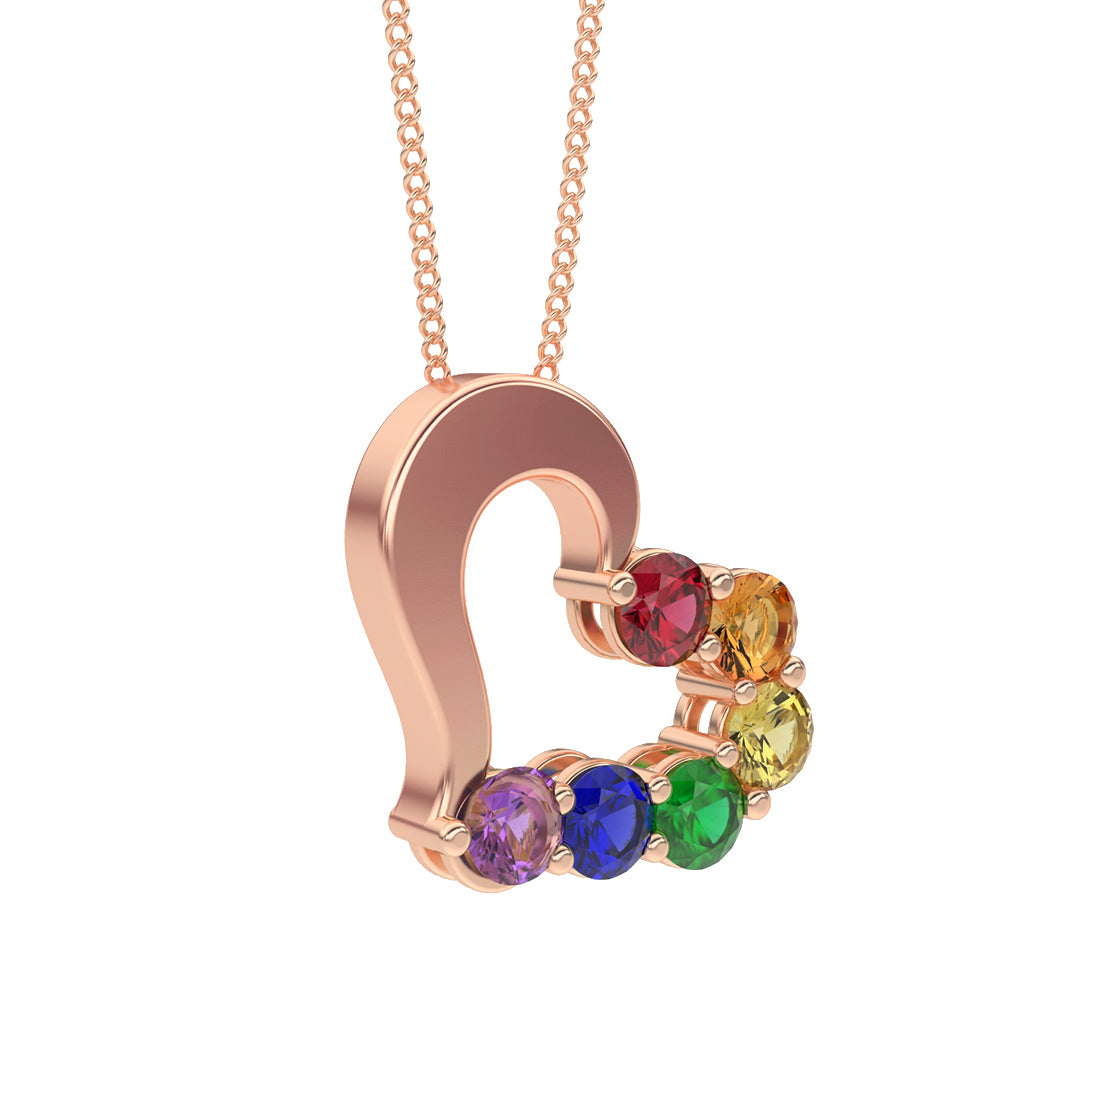 Rainbow Heart Necklace in 14k Rose Gold